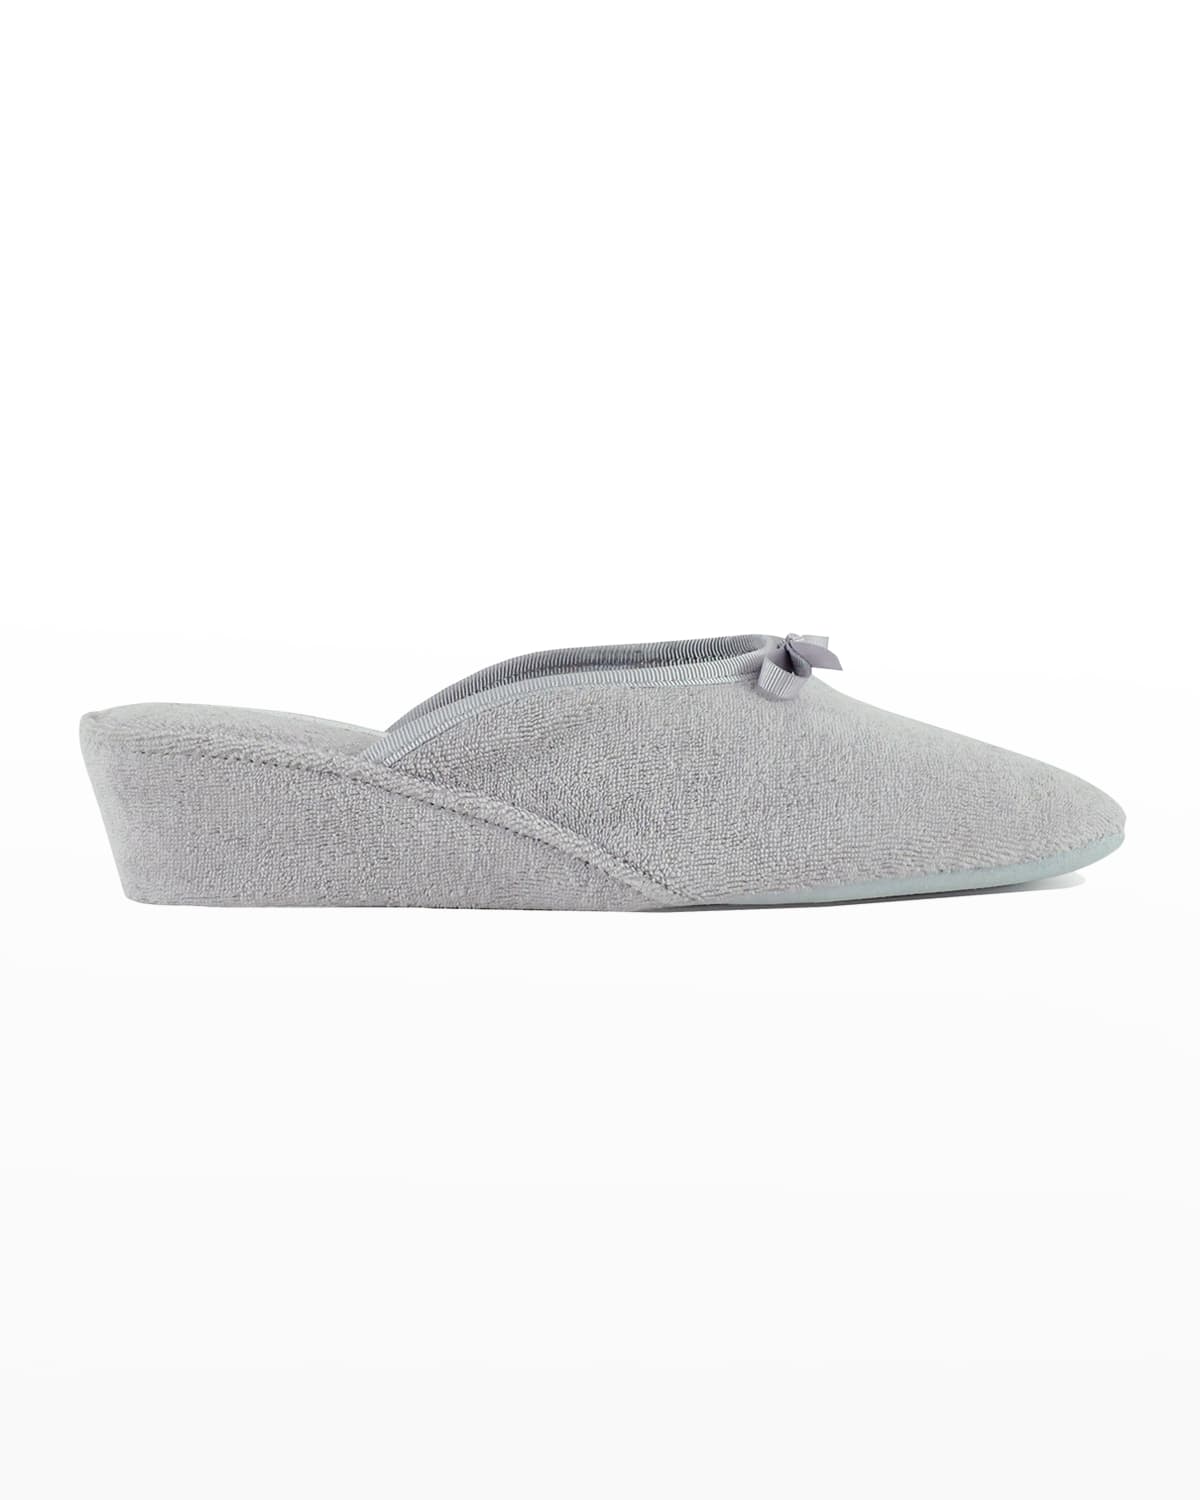 Jacques Levine Terrycloth Wedge Slippers w/ Bow